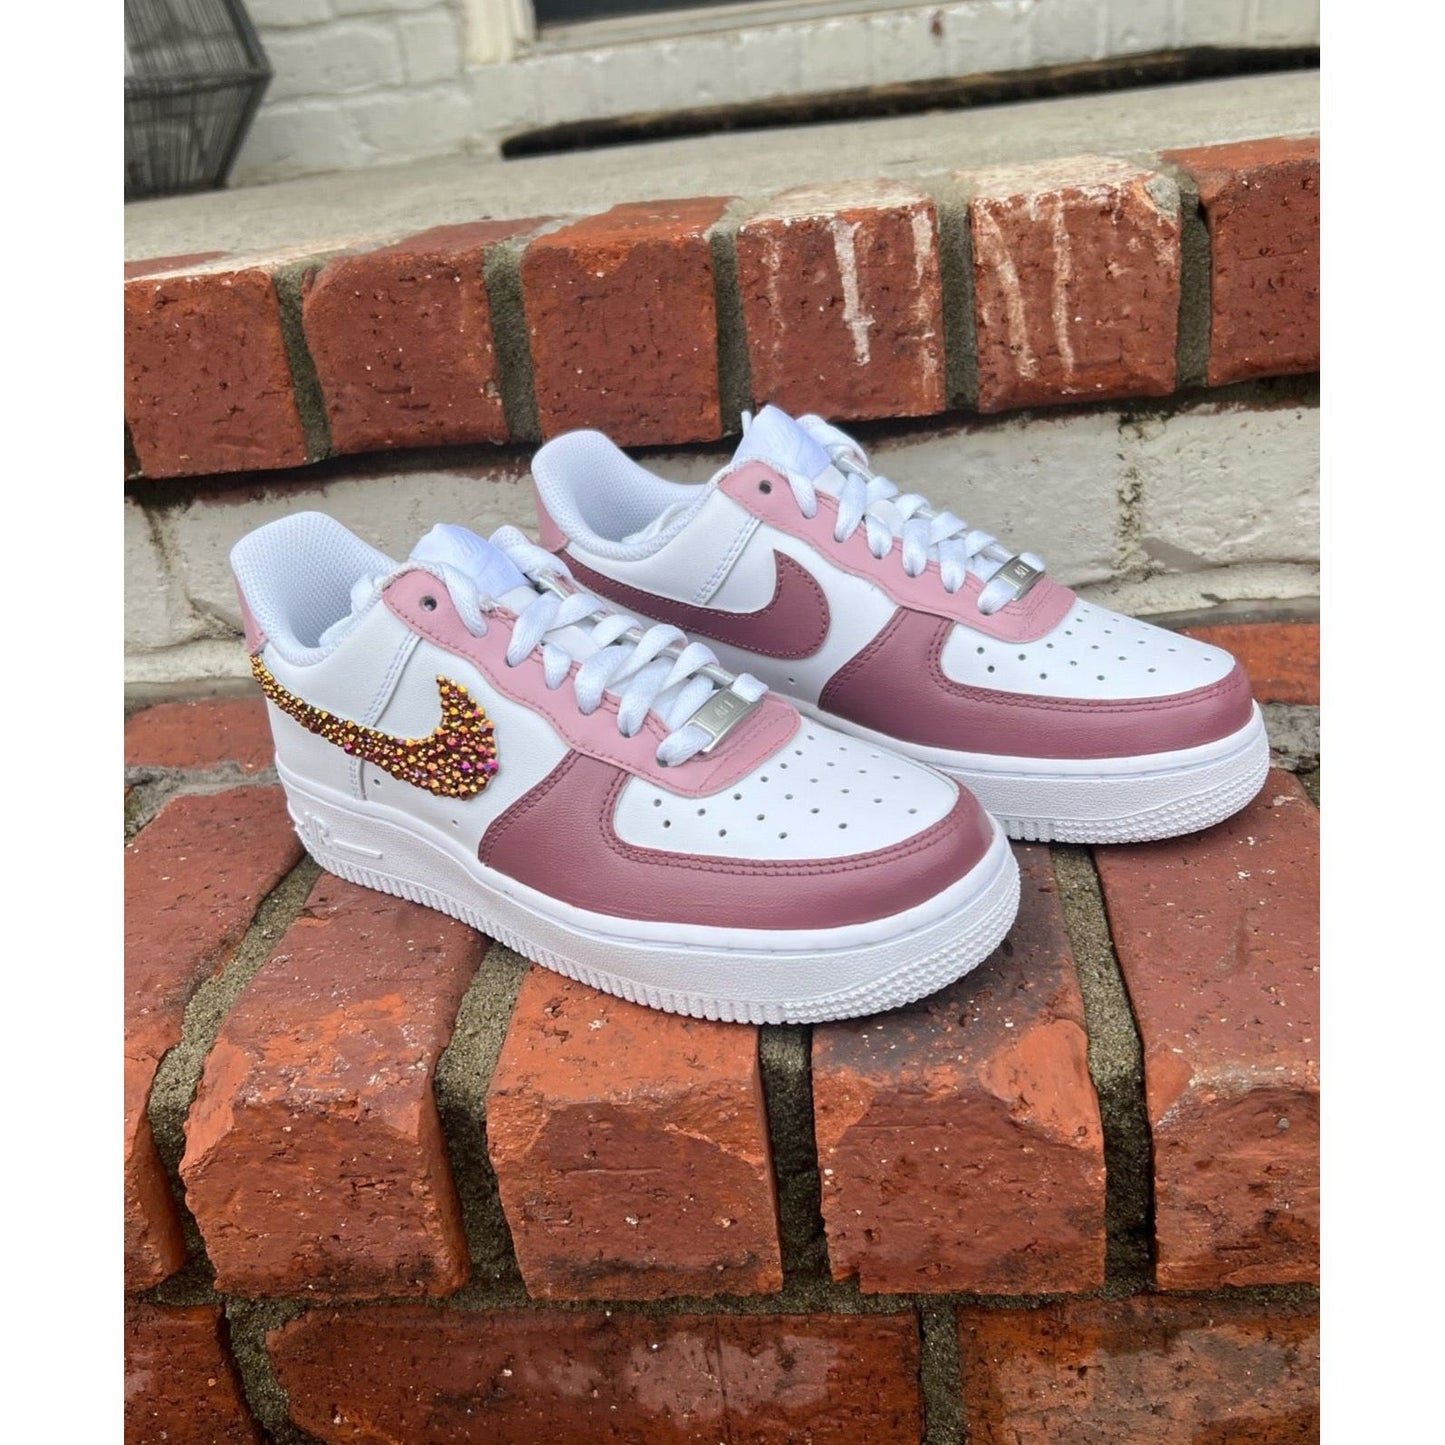 Custom painted and strassed Nike Air Force Ones